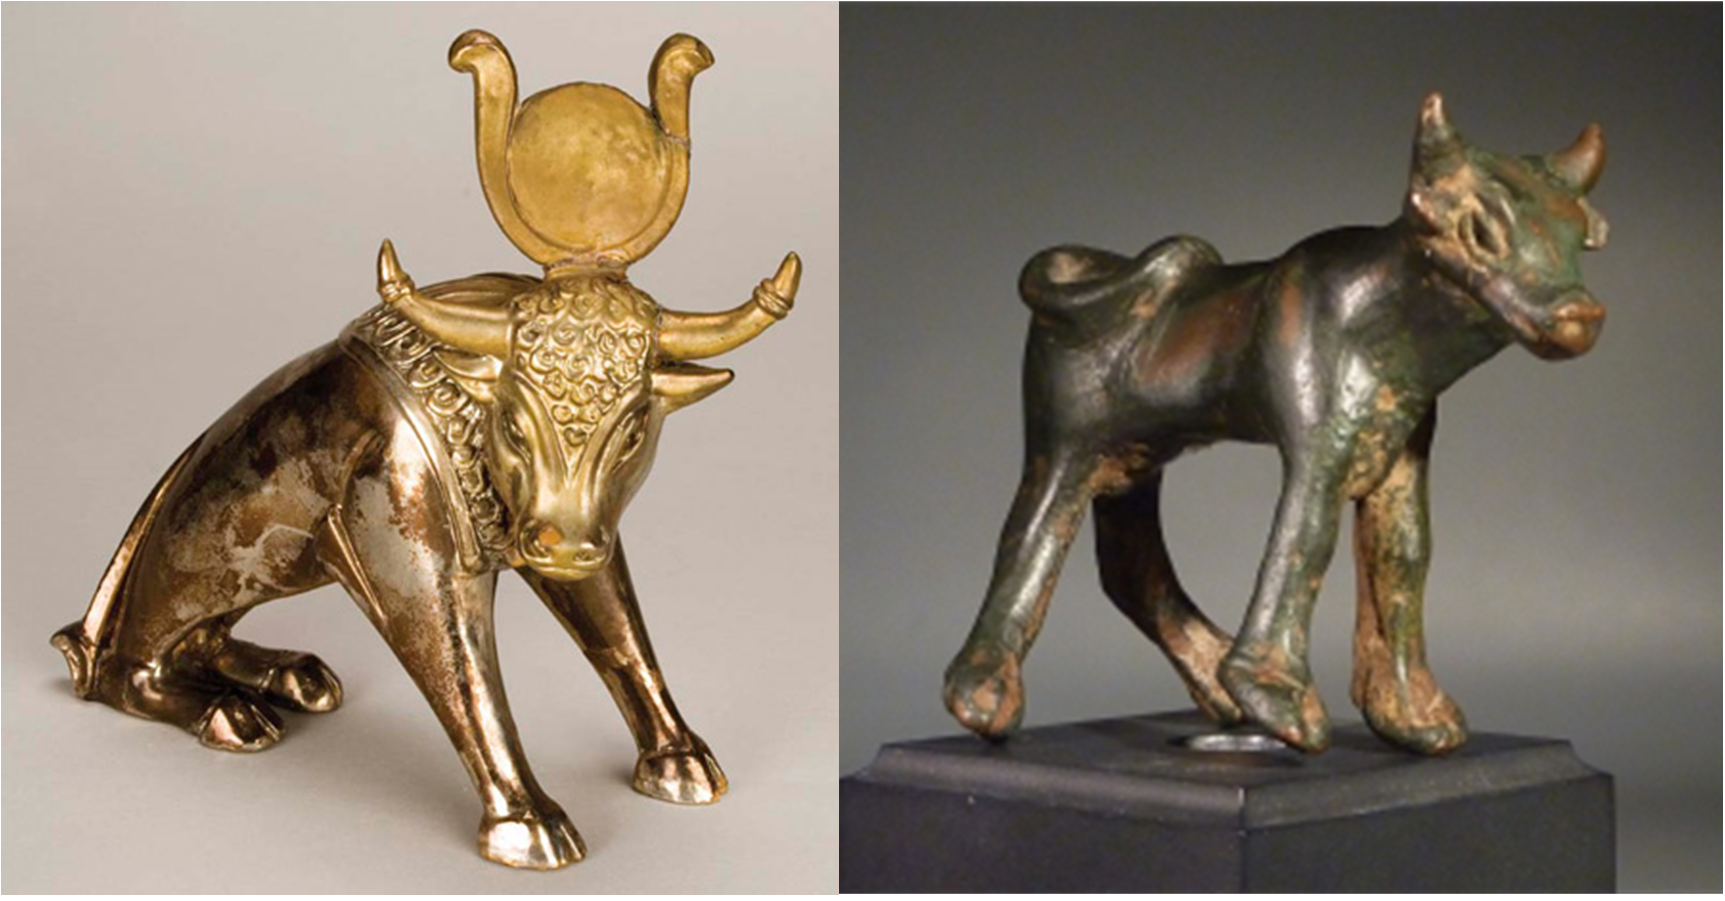 Golden and bronze calf statues. The Israelites tried to take control of their fear by creating an idol.